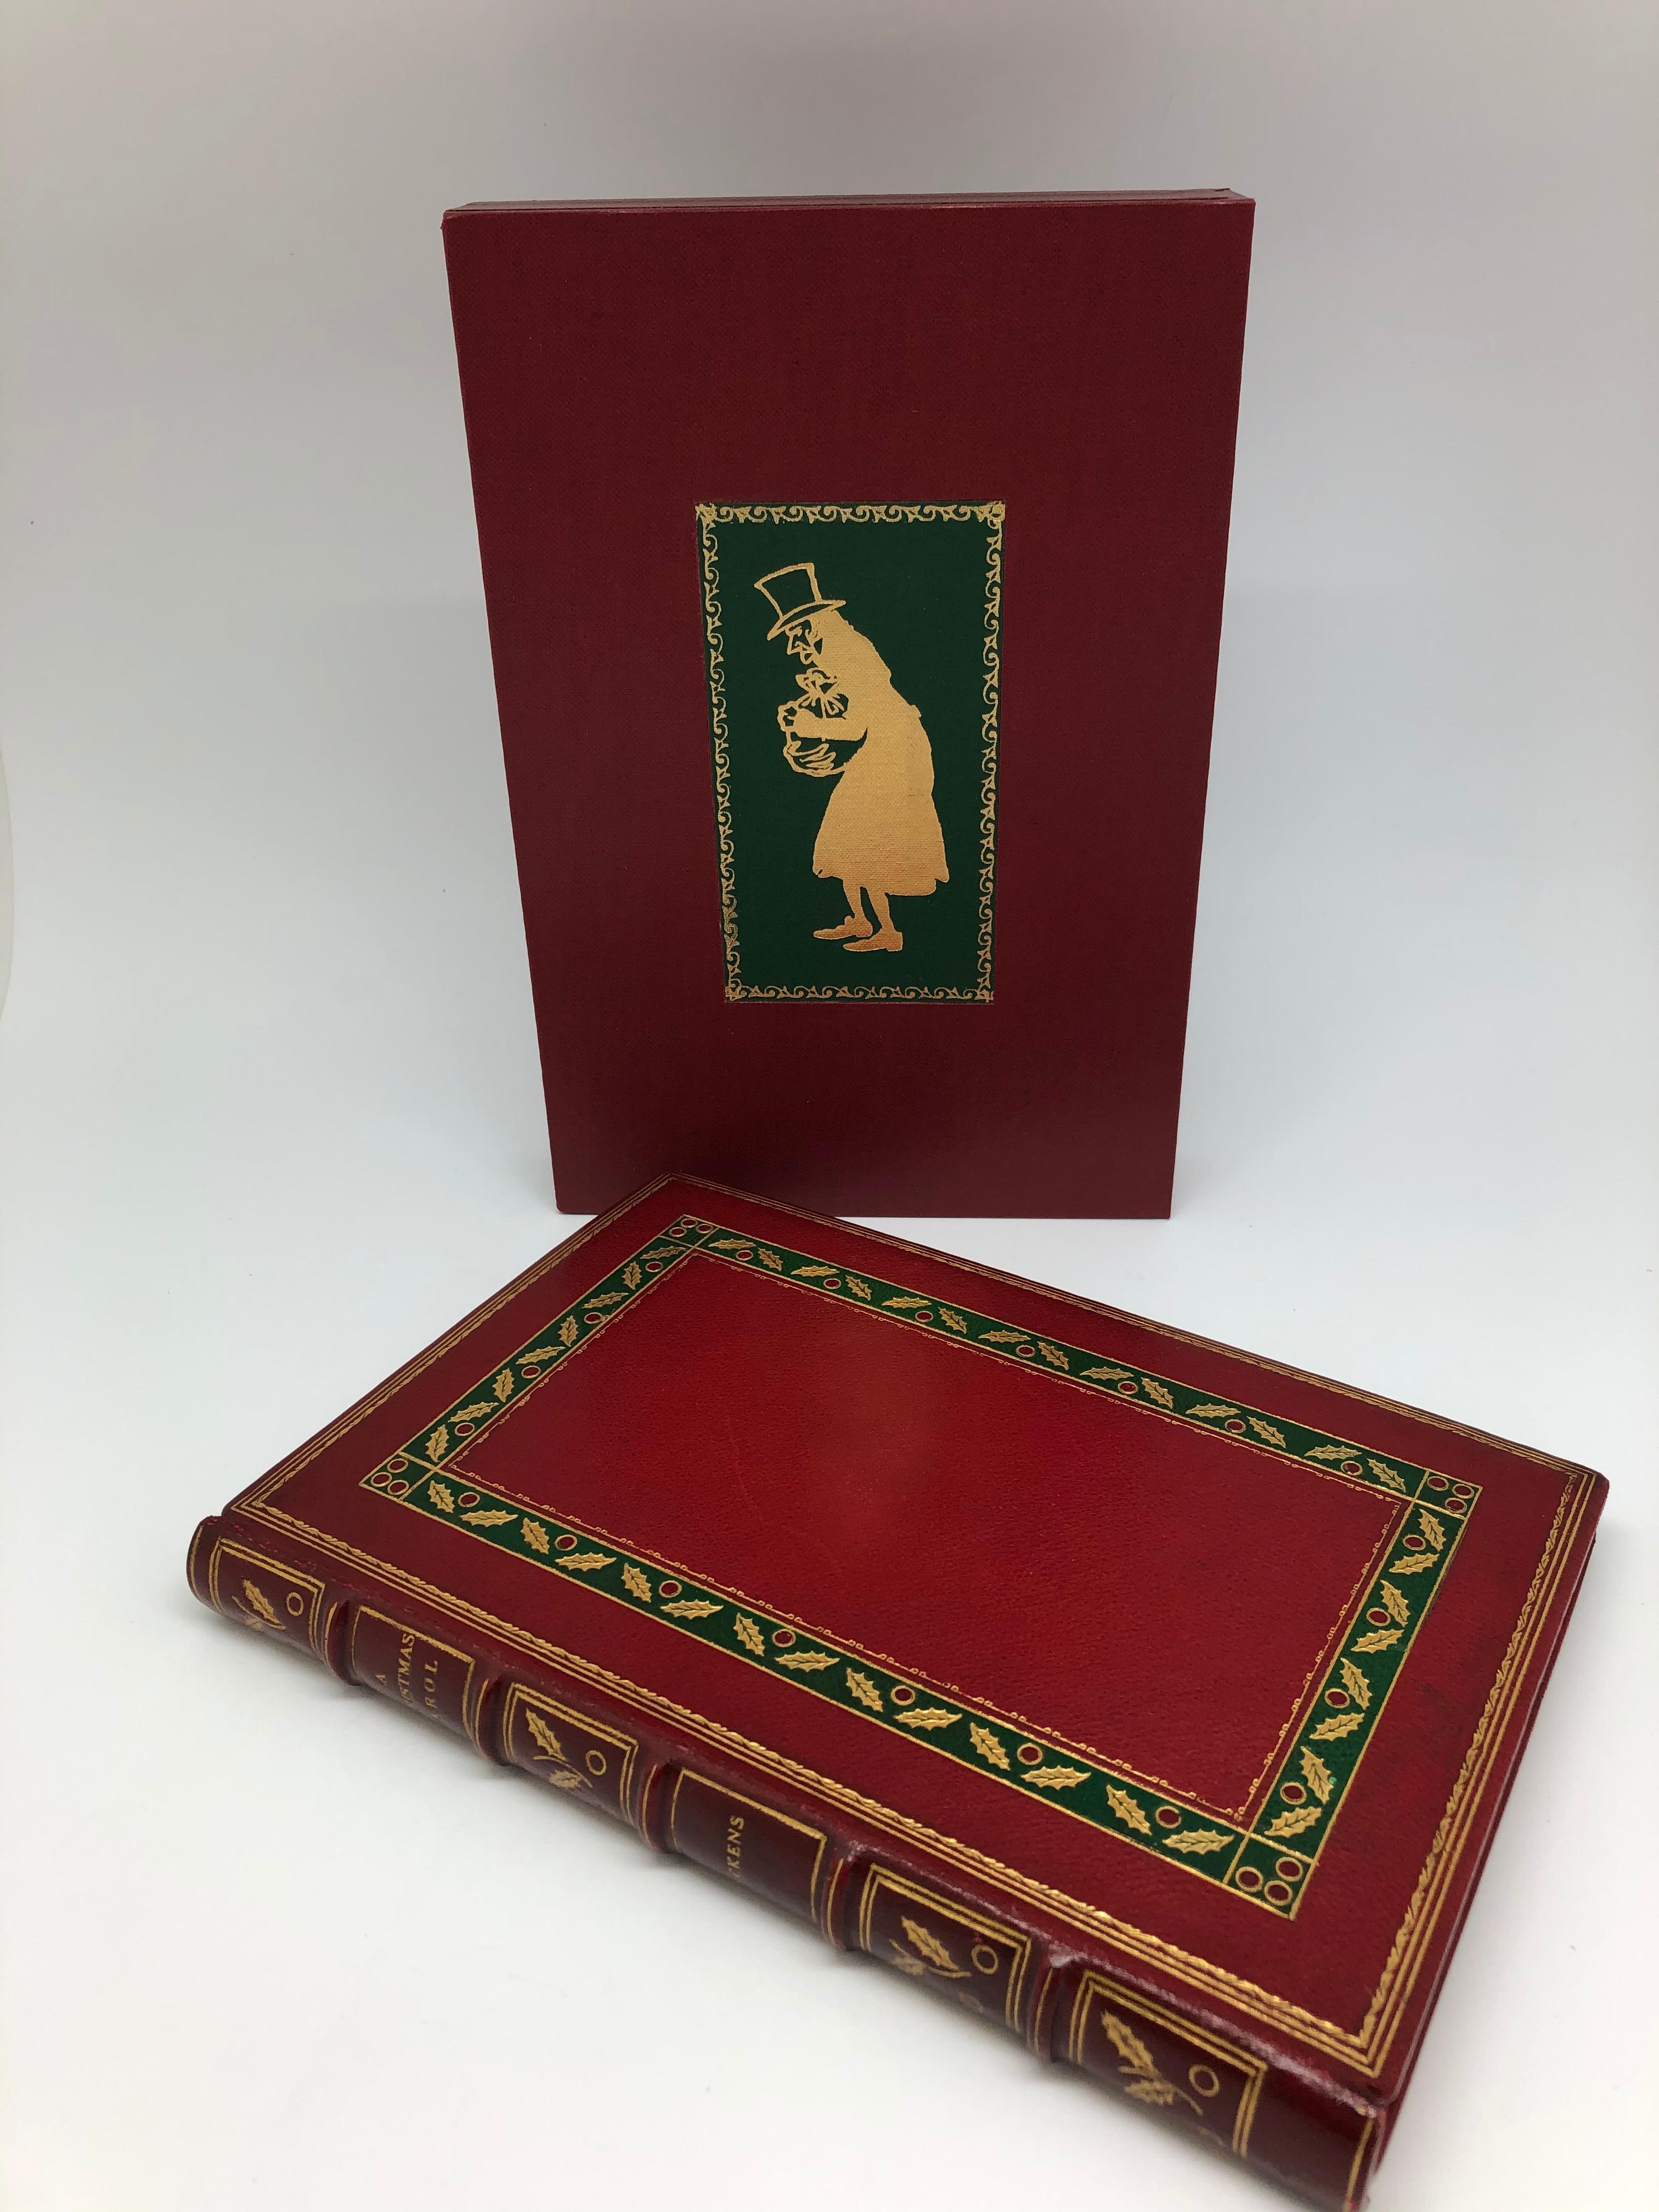 Dickens, Charles. A Christmas Carol in Prose Being a Ghost Story of Yule-Tide. New York: The Roycroft Shop, 1902. First trade edition. Bound in full leather and housed in an archival slipcase.

This beautifully bound 1902 Roycroft edition of Charles